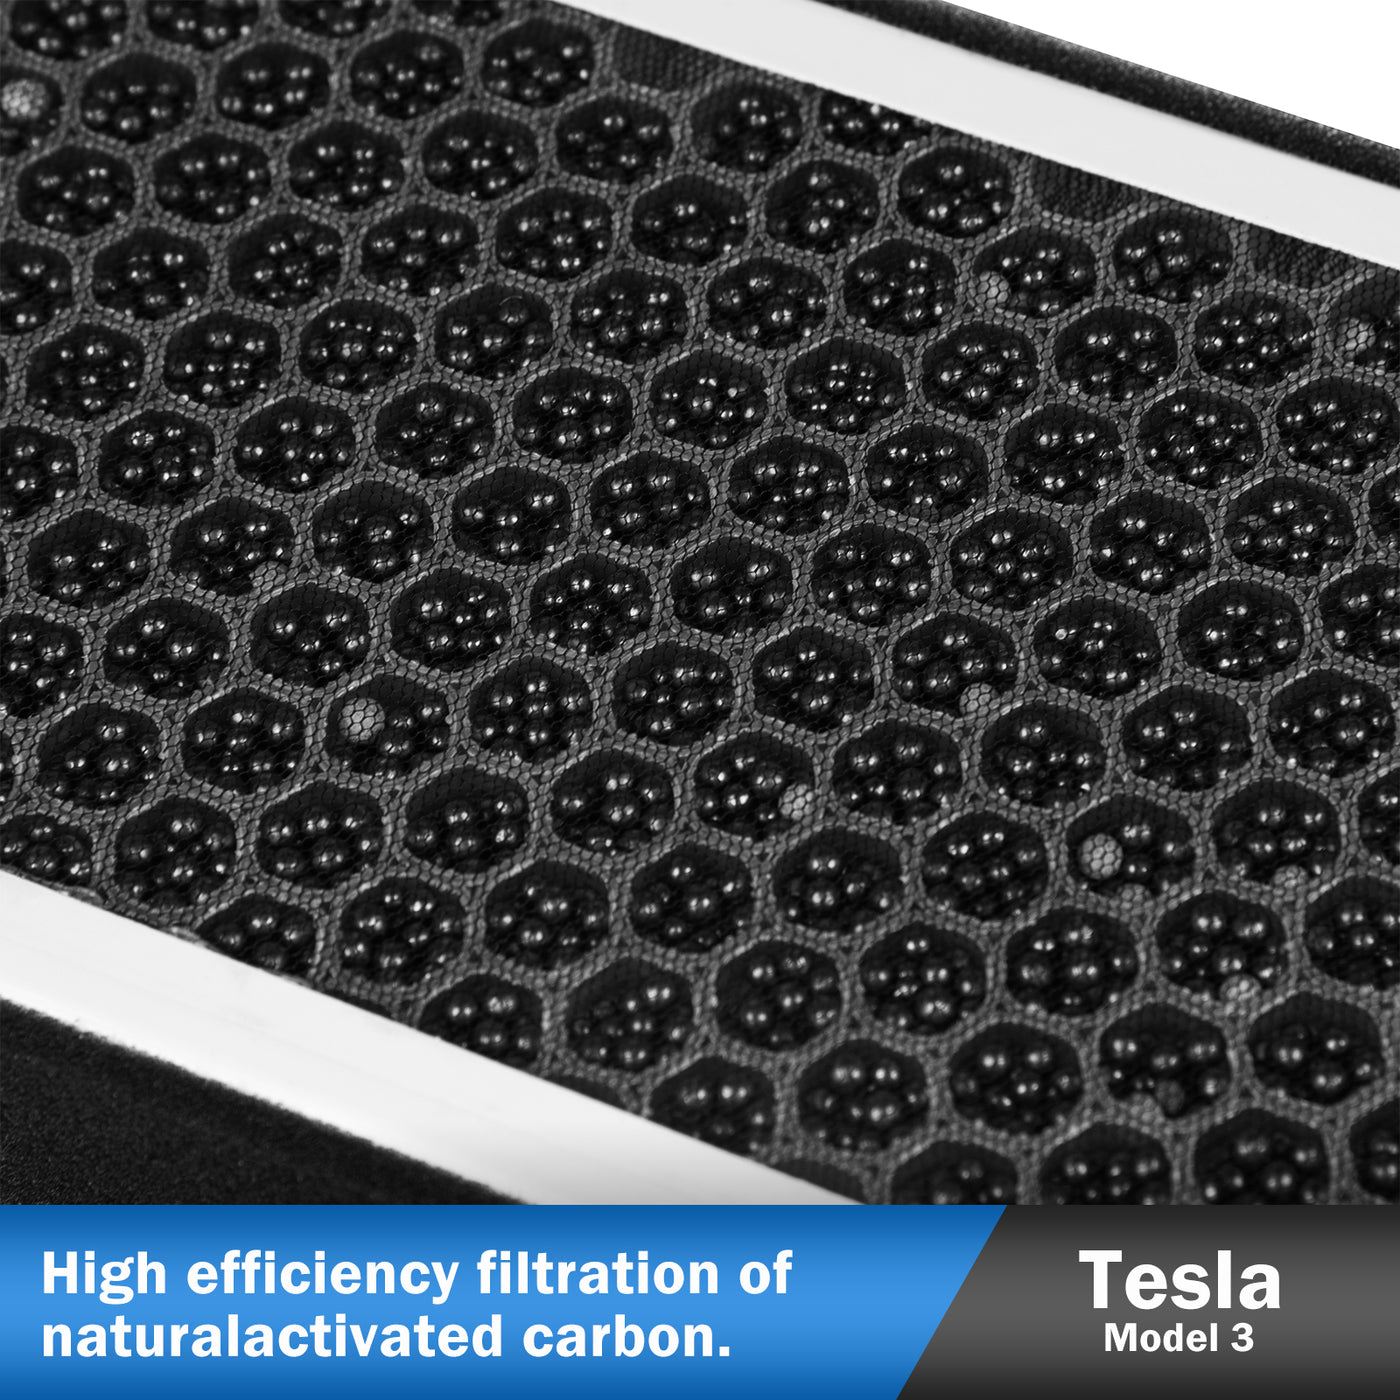 Turoaz Air Filter HEPA Fit For Tesla Model 3 Model Y 2017+, Activated